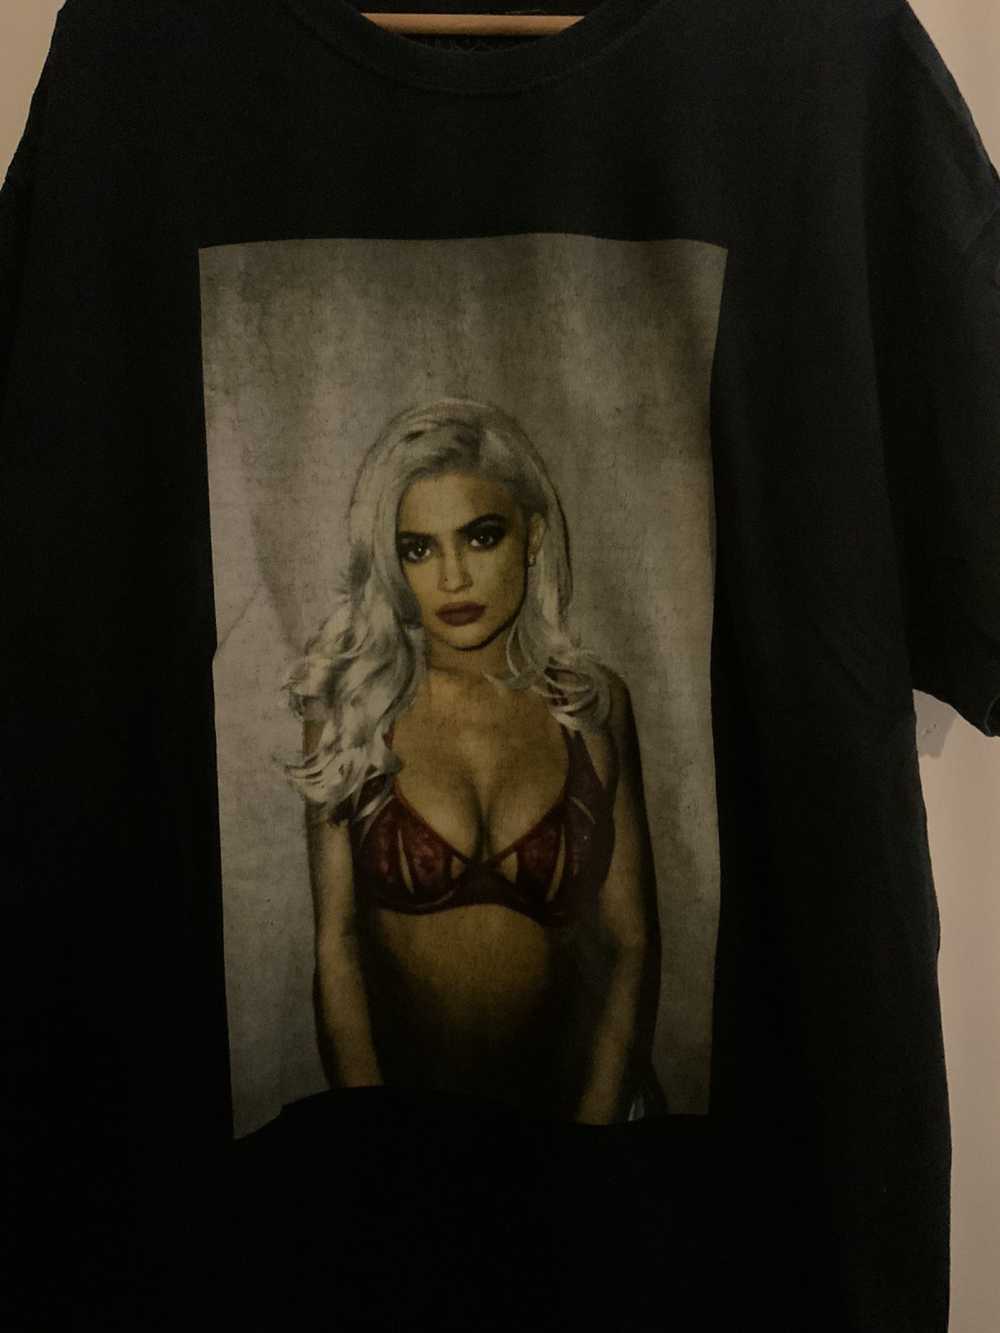 Kylie Cosmetics Kylie Jenner T-Shirt - image 2